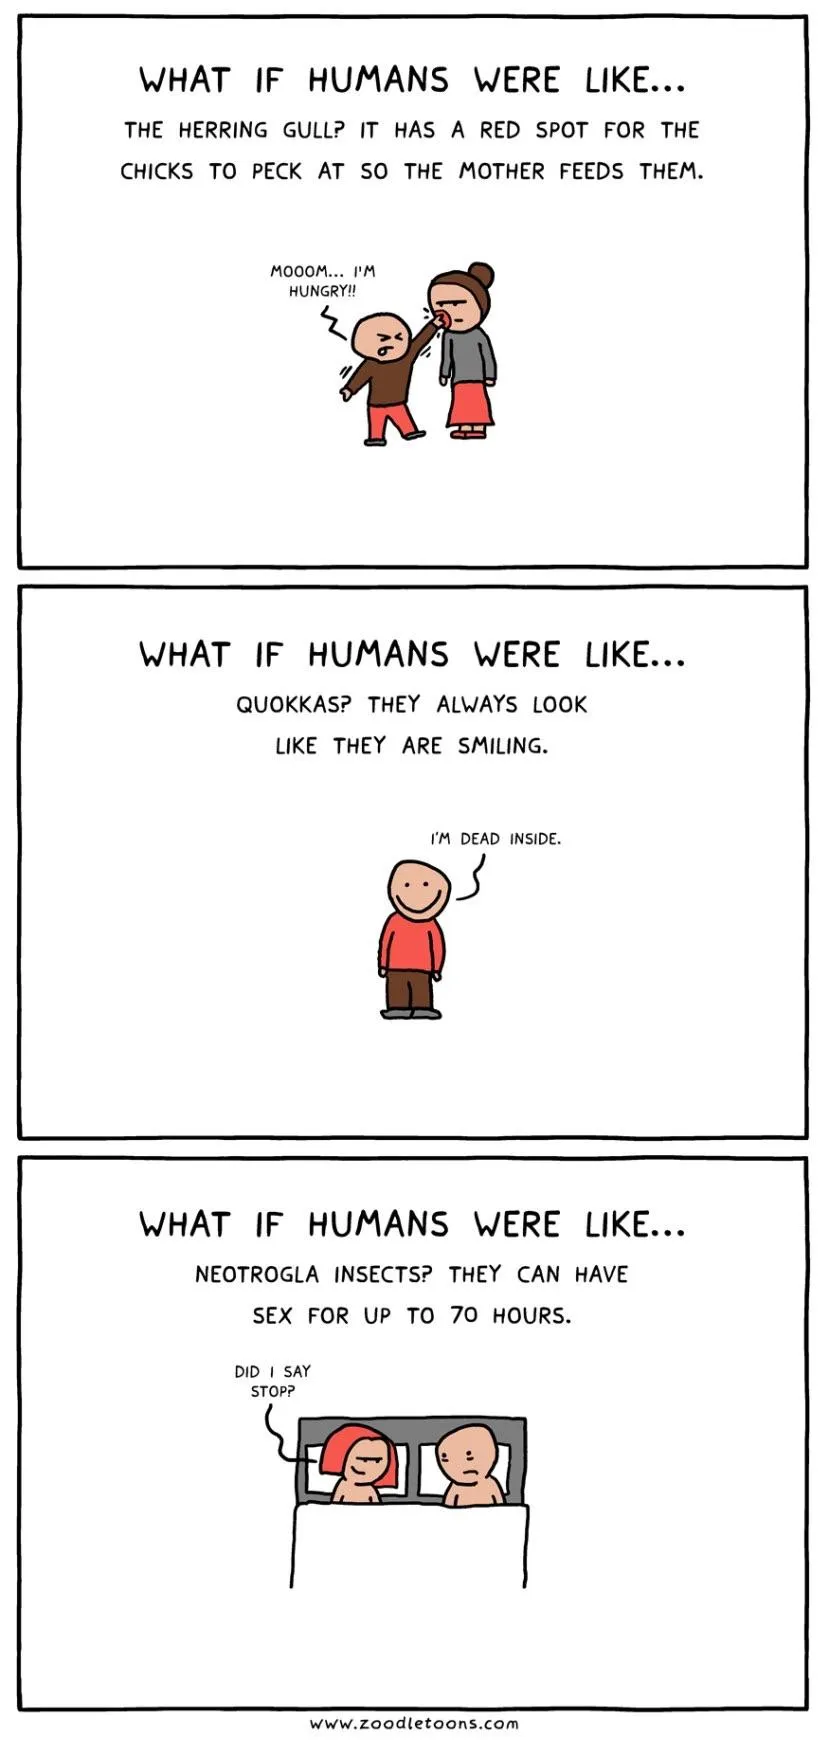 What if humans were like...